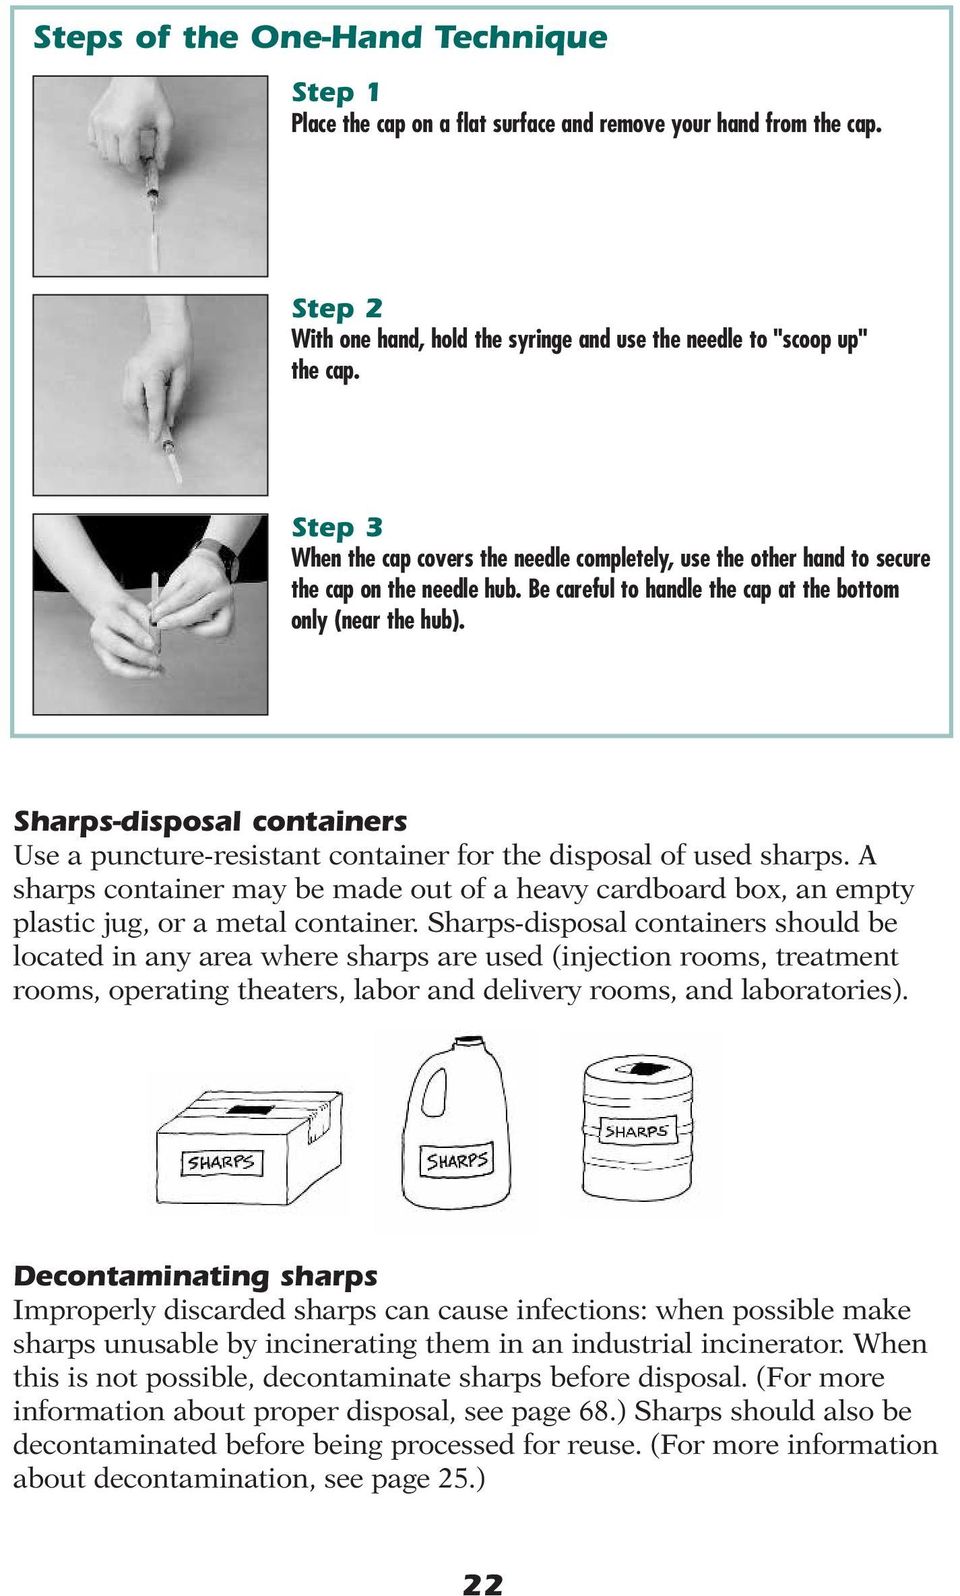 Sharps-disposal containers Use a puncture-resistant container for the disposal of used sharps. A sharps container may be made out of a heavy cardboard box, an empty plastic jug, or a metal container.